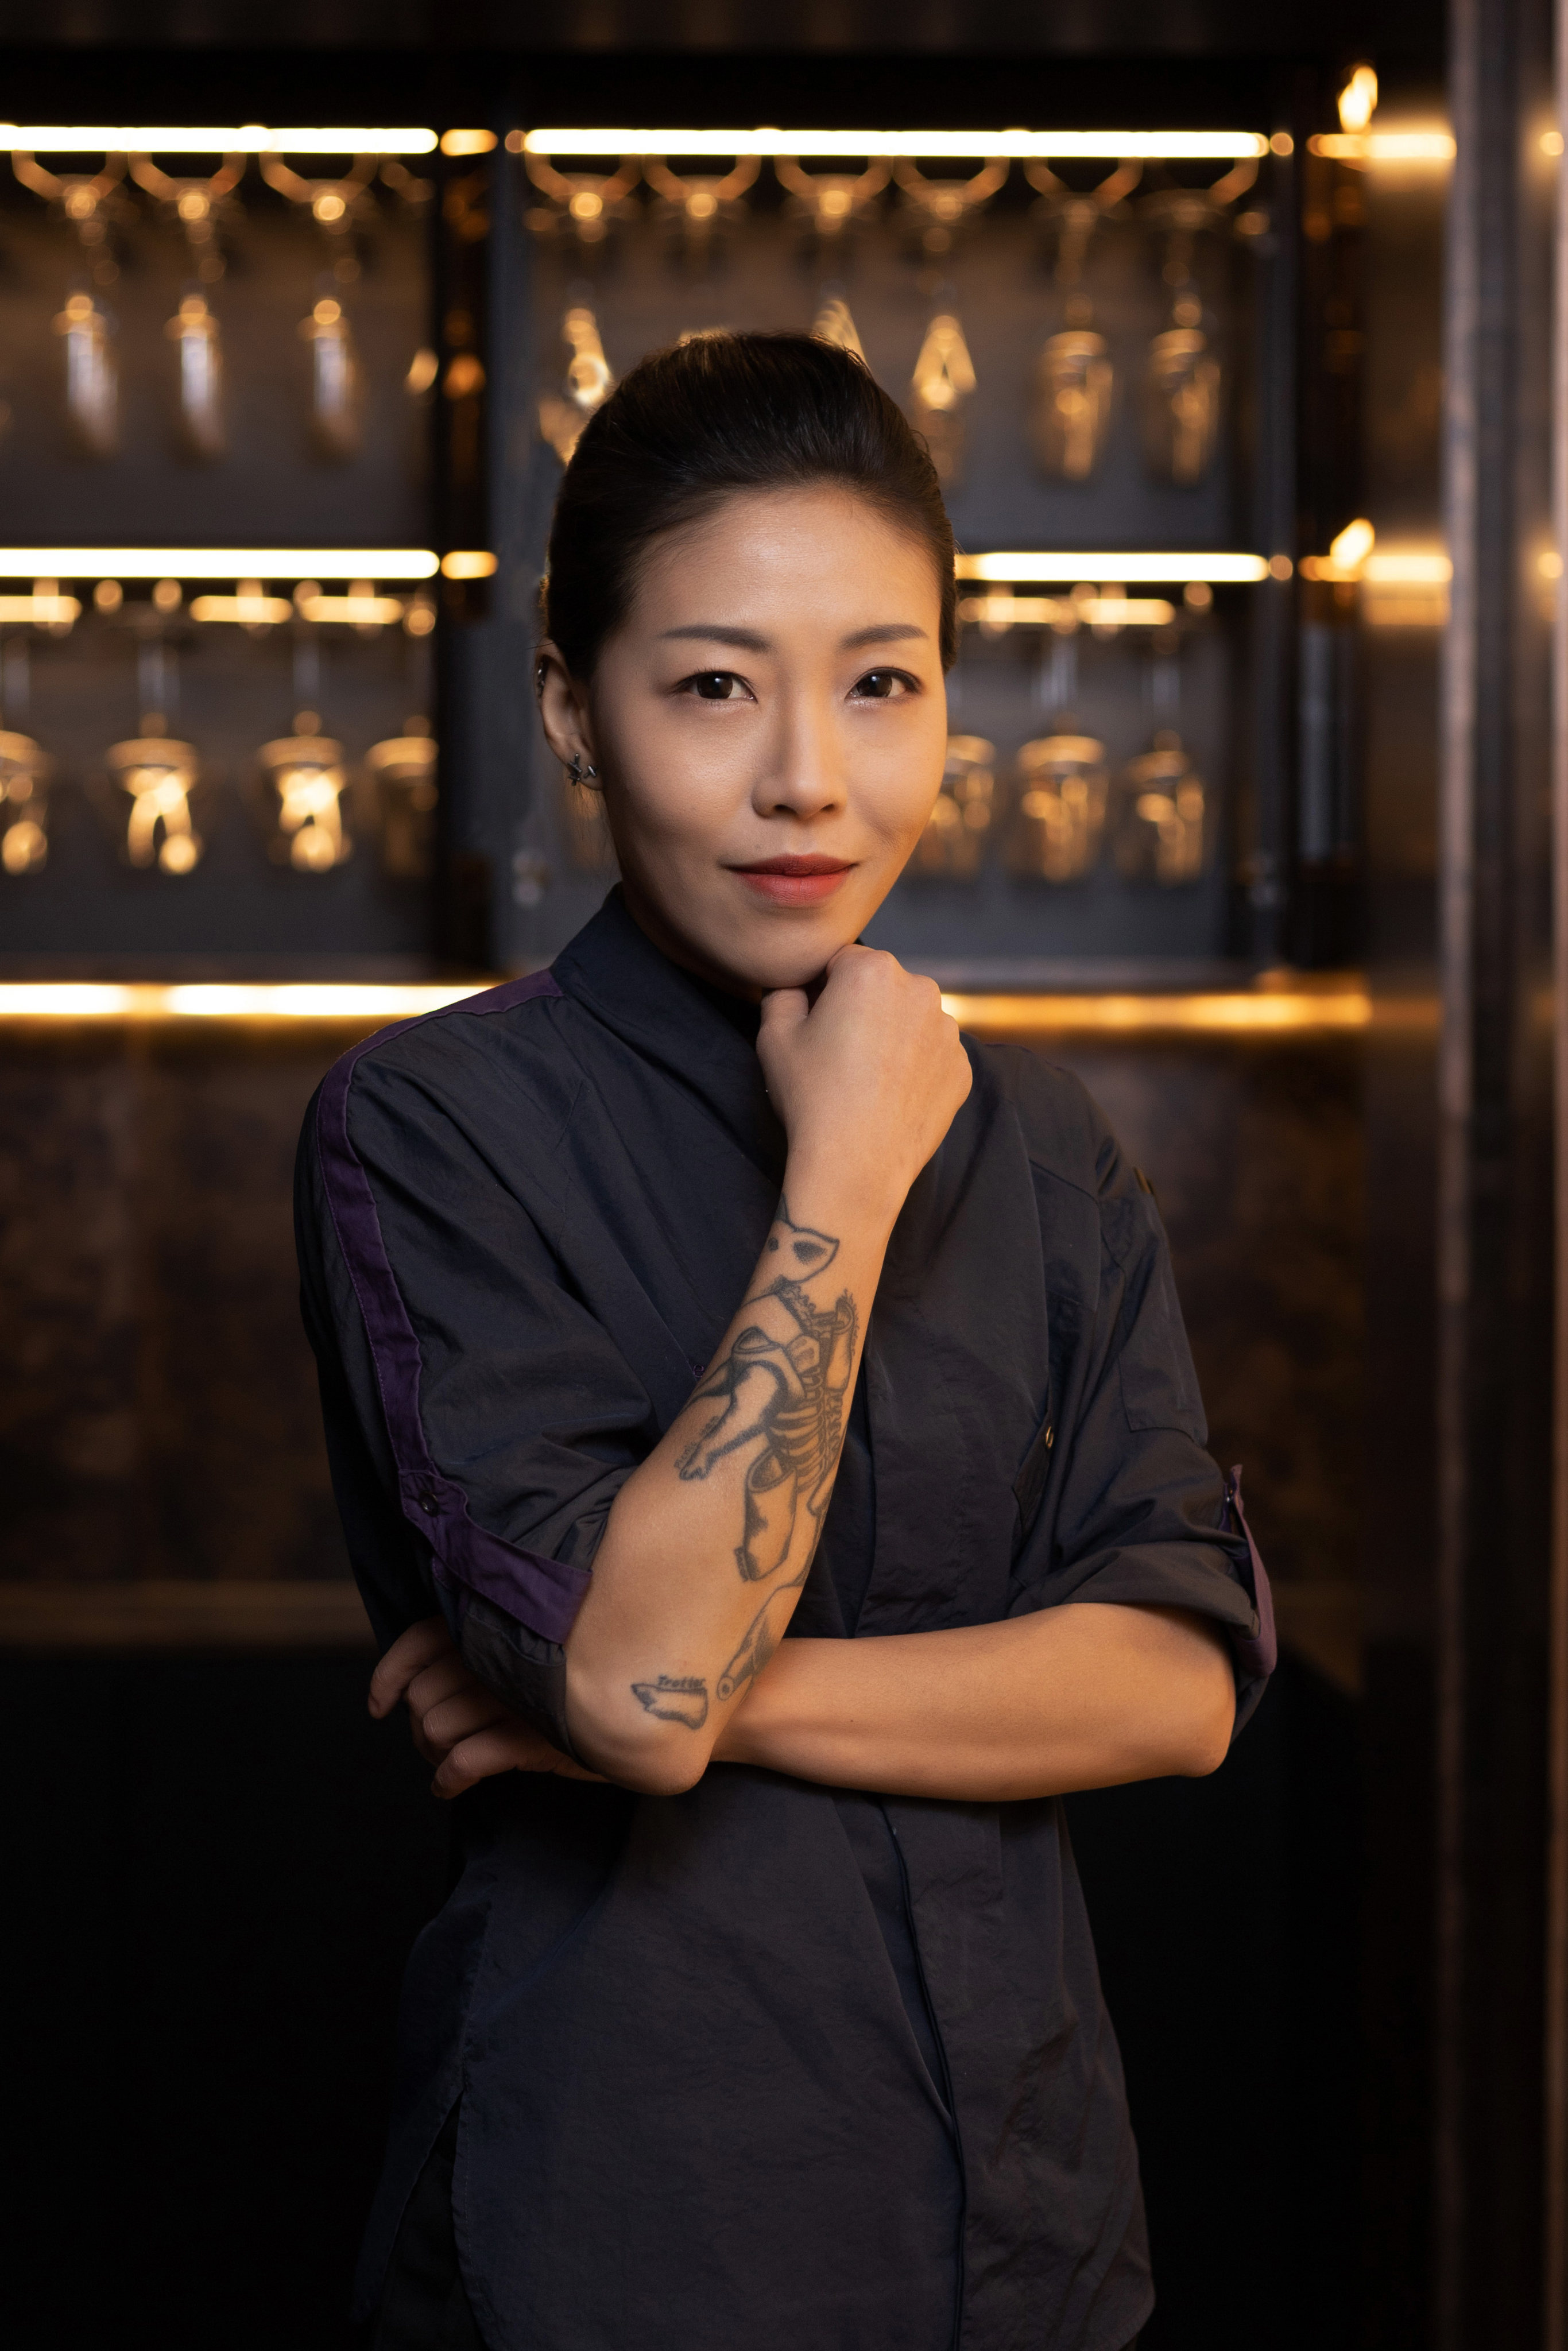 Hong Kong-born DeAille Tam is executive chef and co-founder of Obscura in Shanghai. She was recently awarded Asia’s Best Female Chef 2021 by Asia’s 50 Best Restaurants. Photo: Obscura